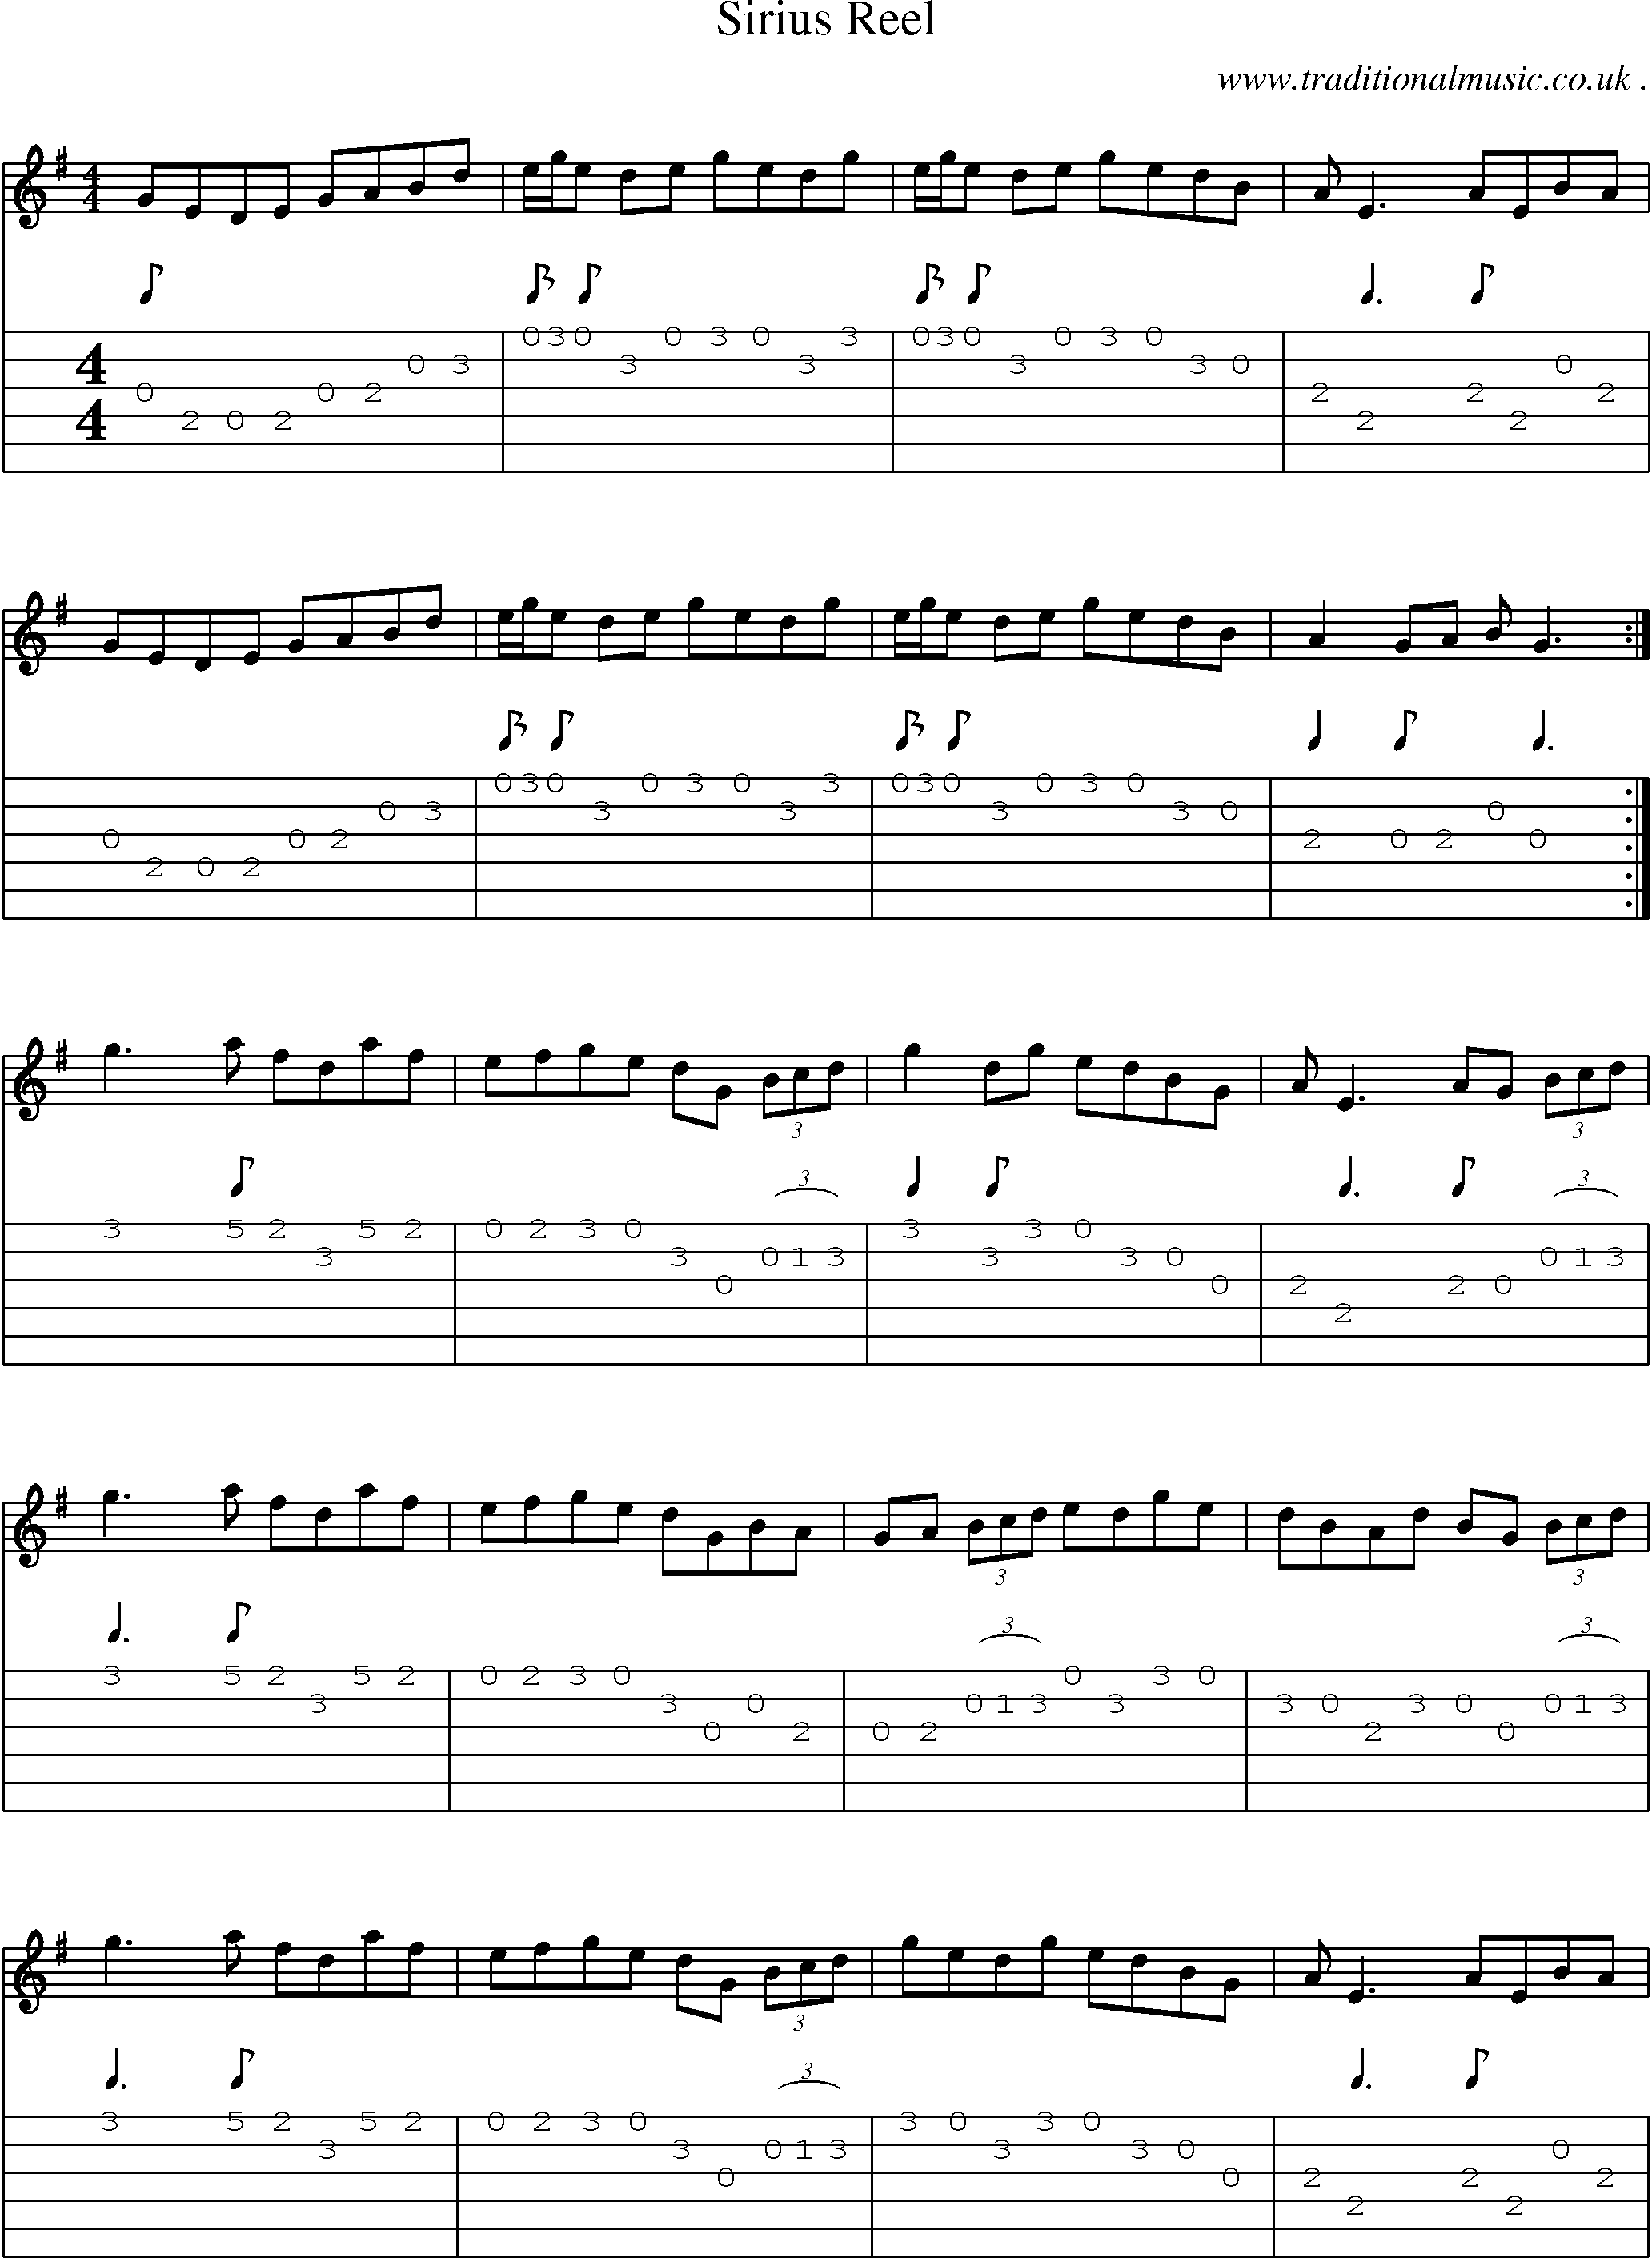 Sheet-Music and Guitar Tabs for Sirius Reel